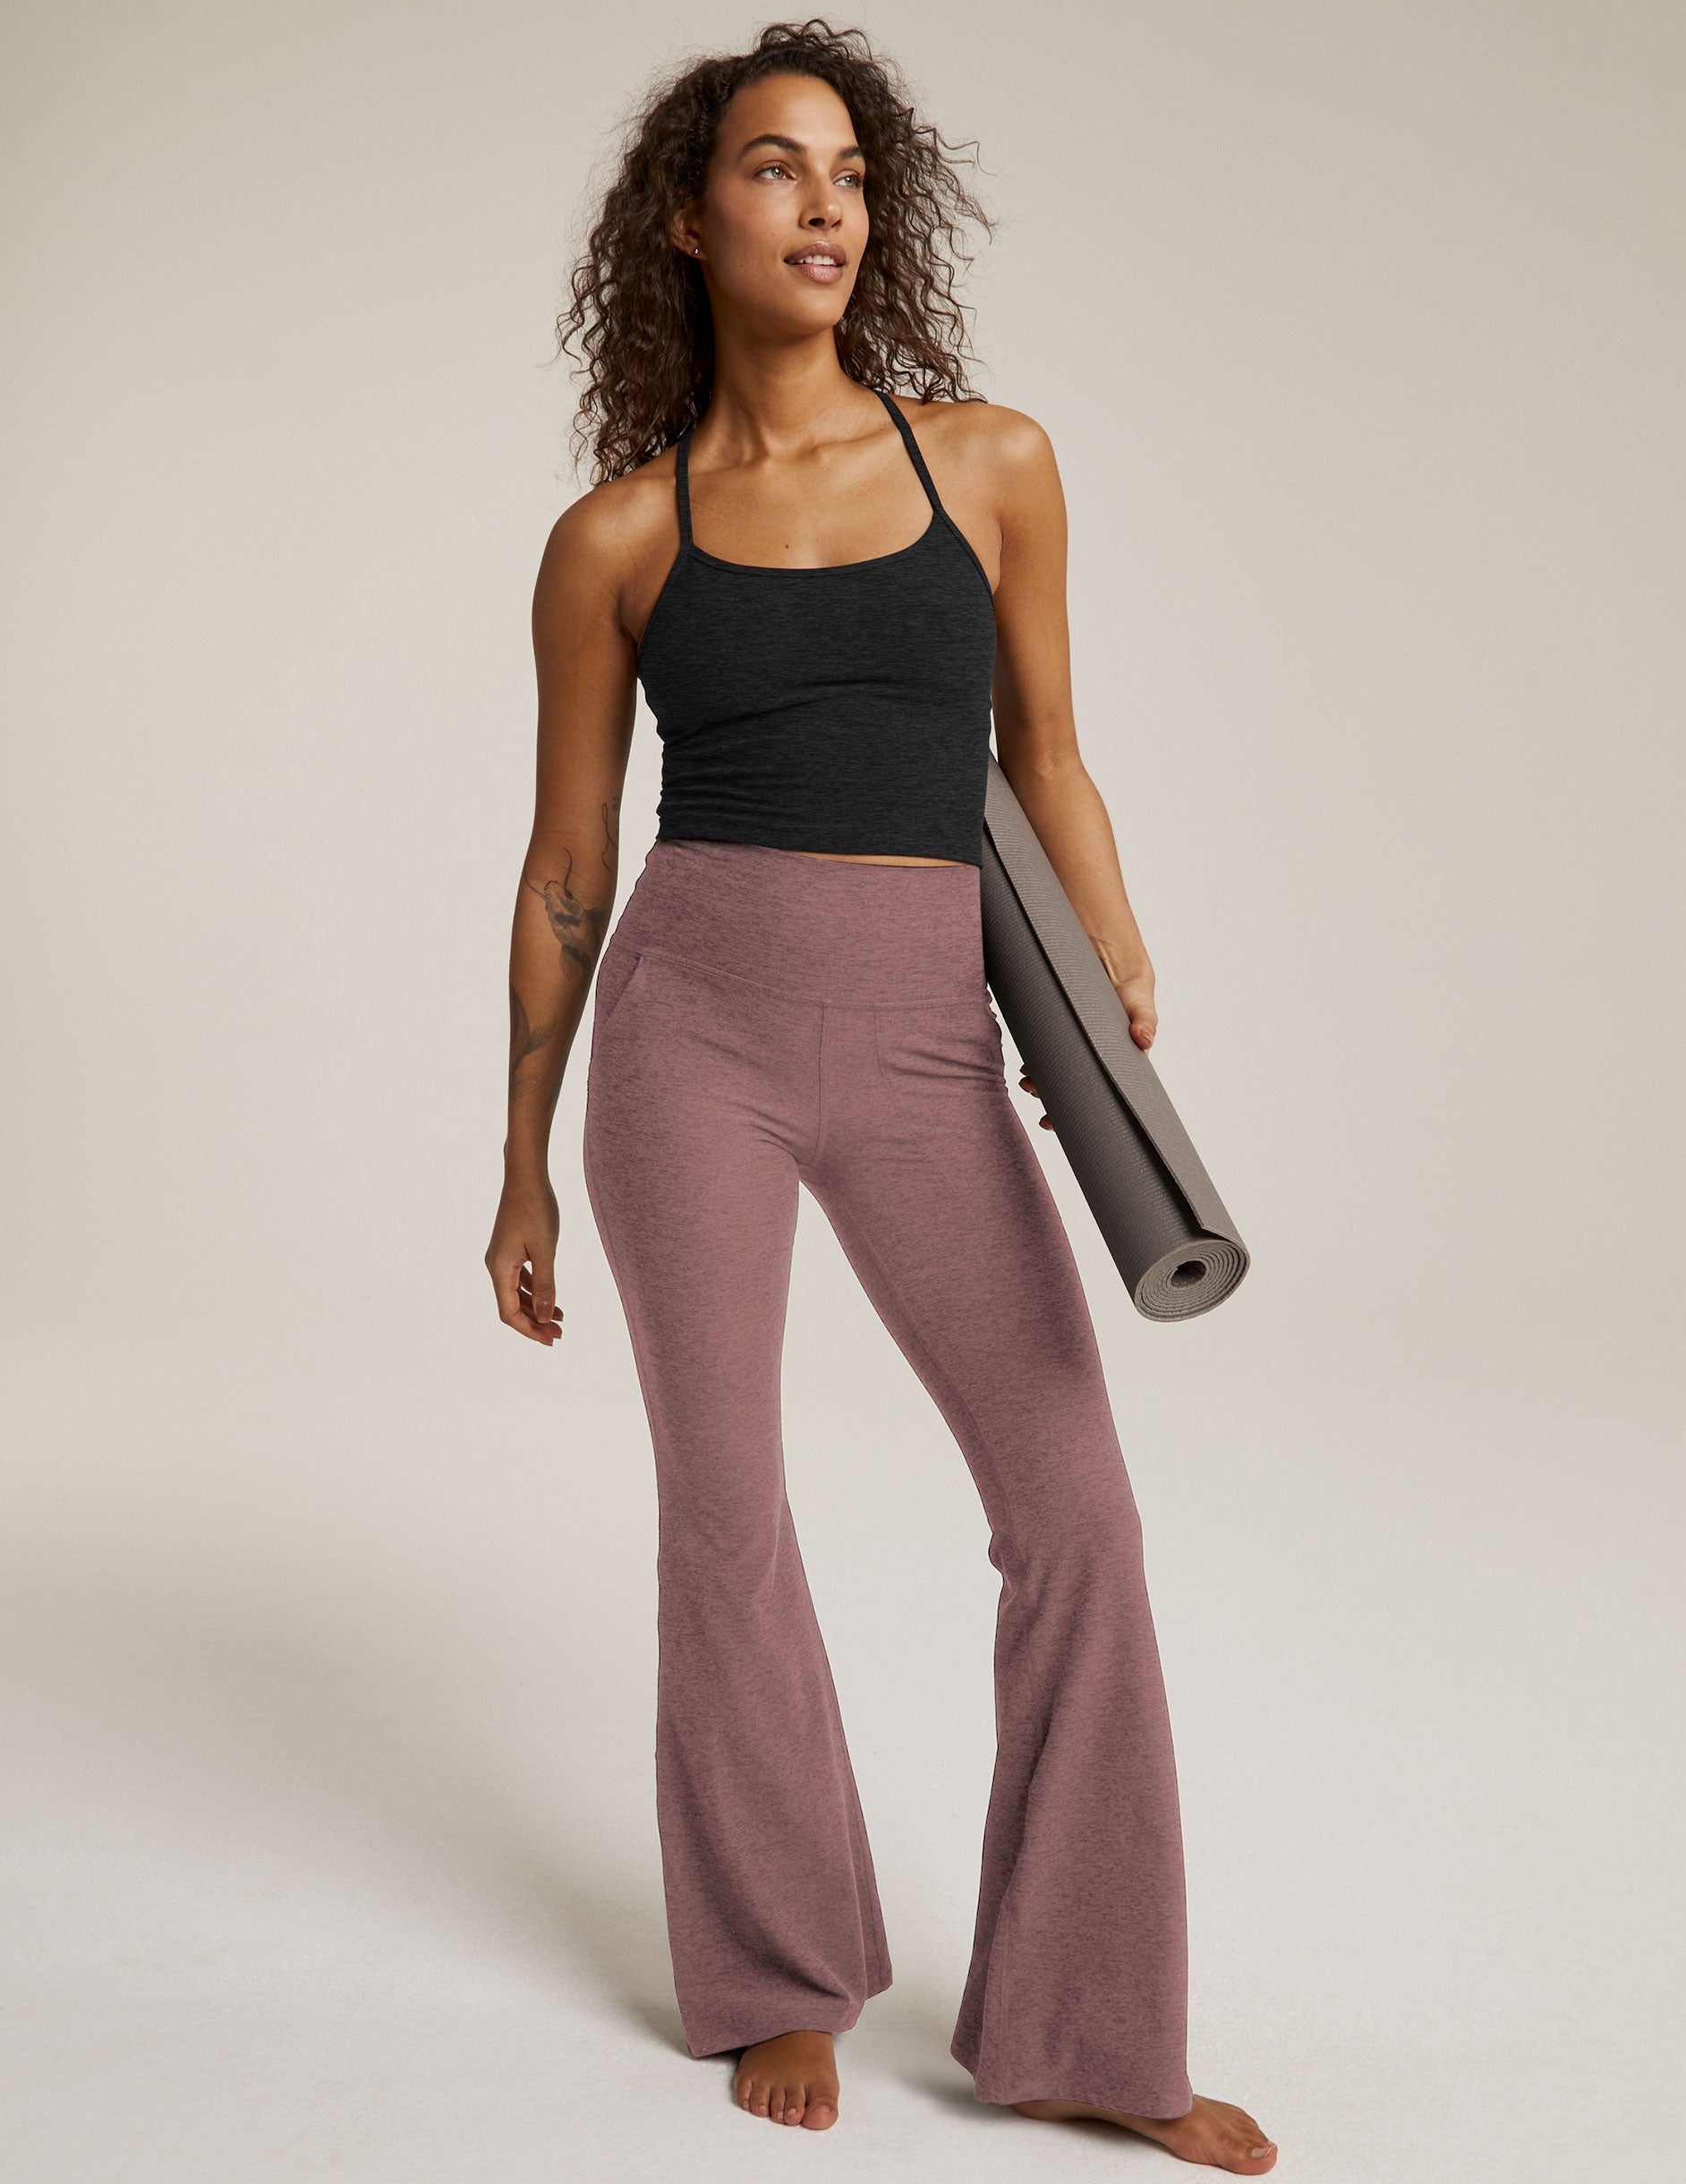 Spacedye All Day Flare High Waisted Pant